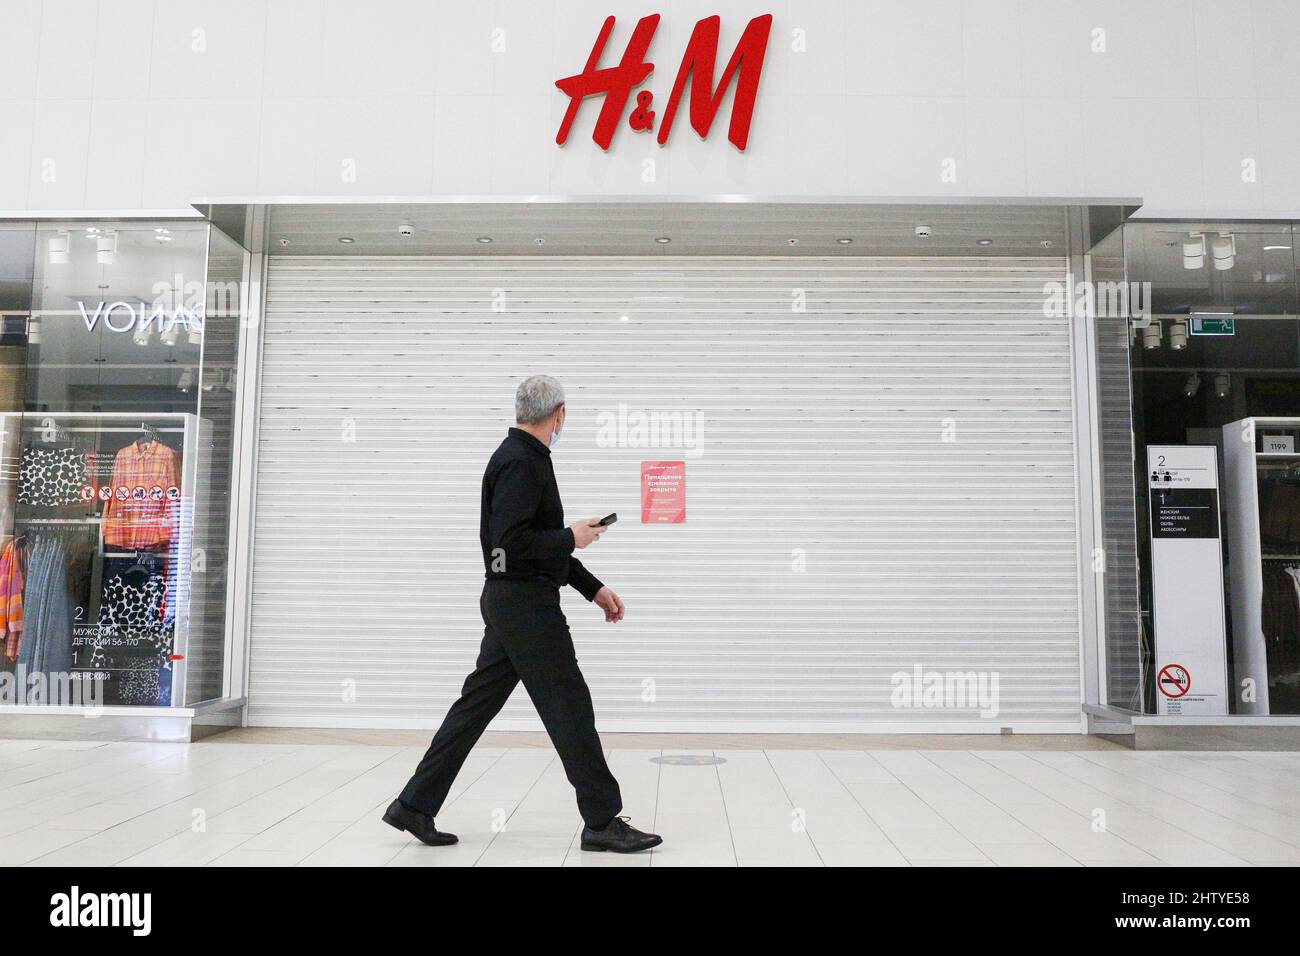 H&m Shopping High Resolution Stock Photography and Images - Alamy